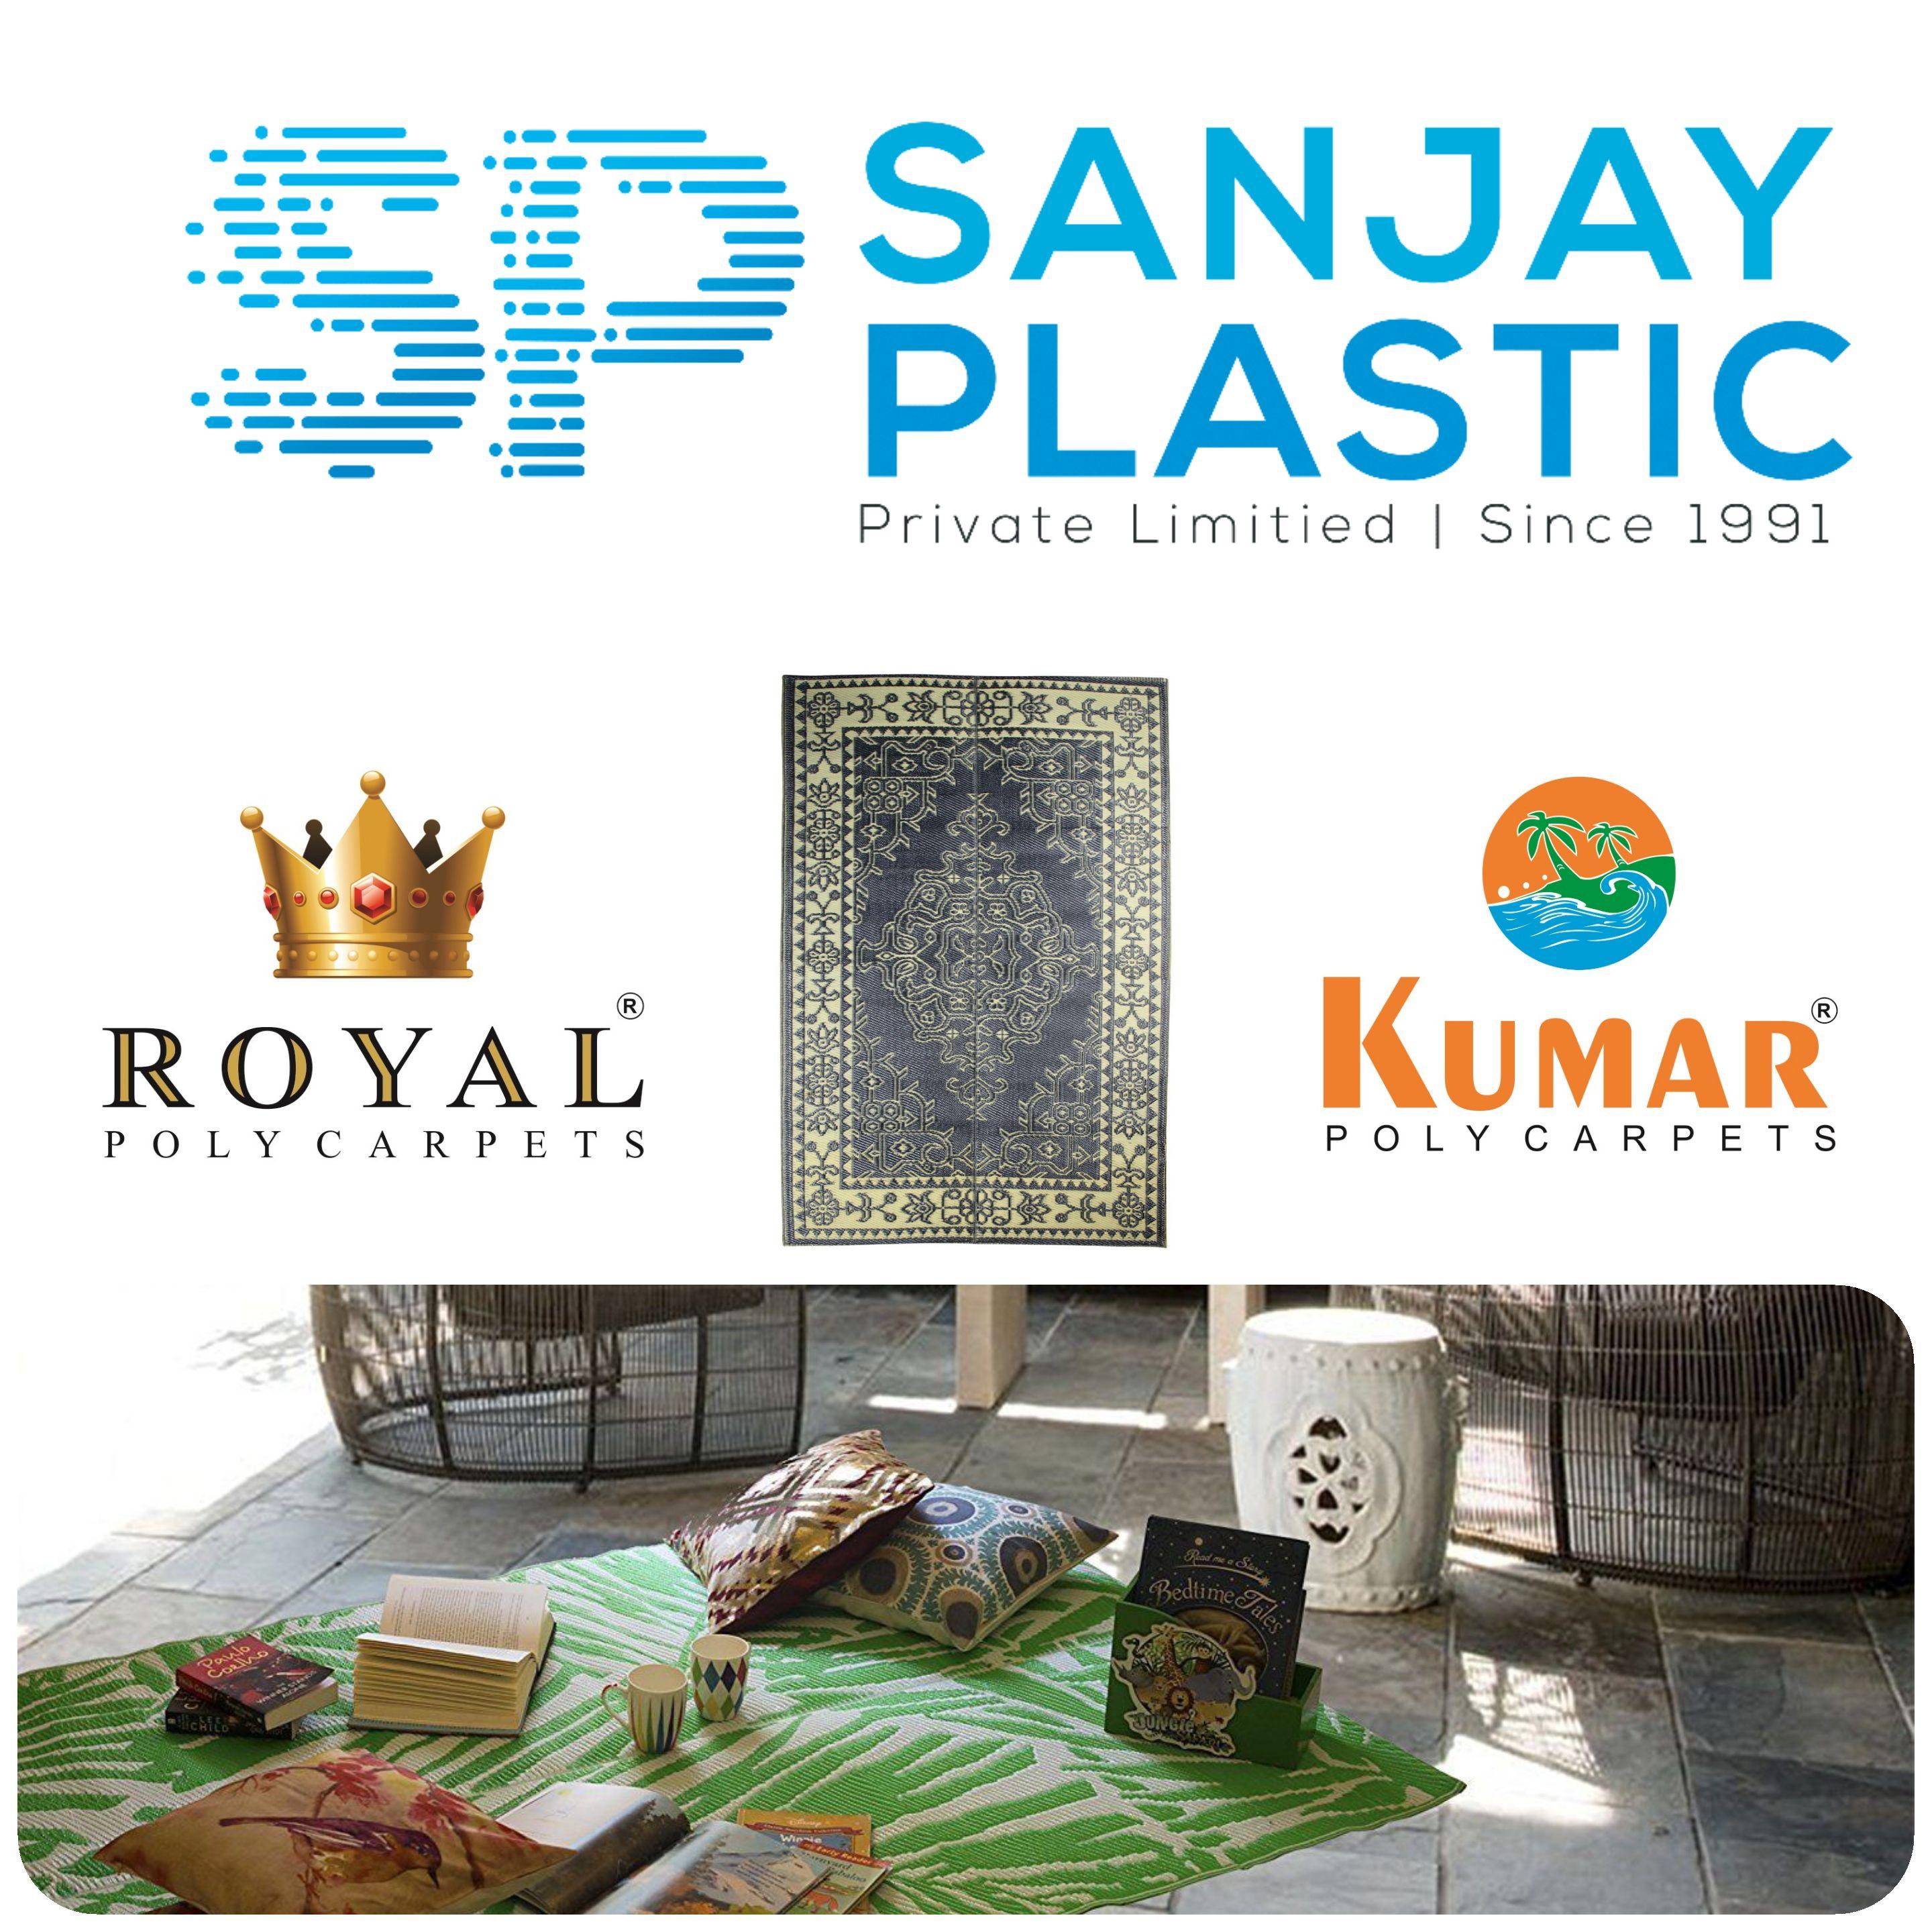 Sanjay Plastic Private Limited